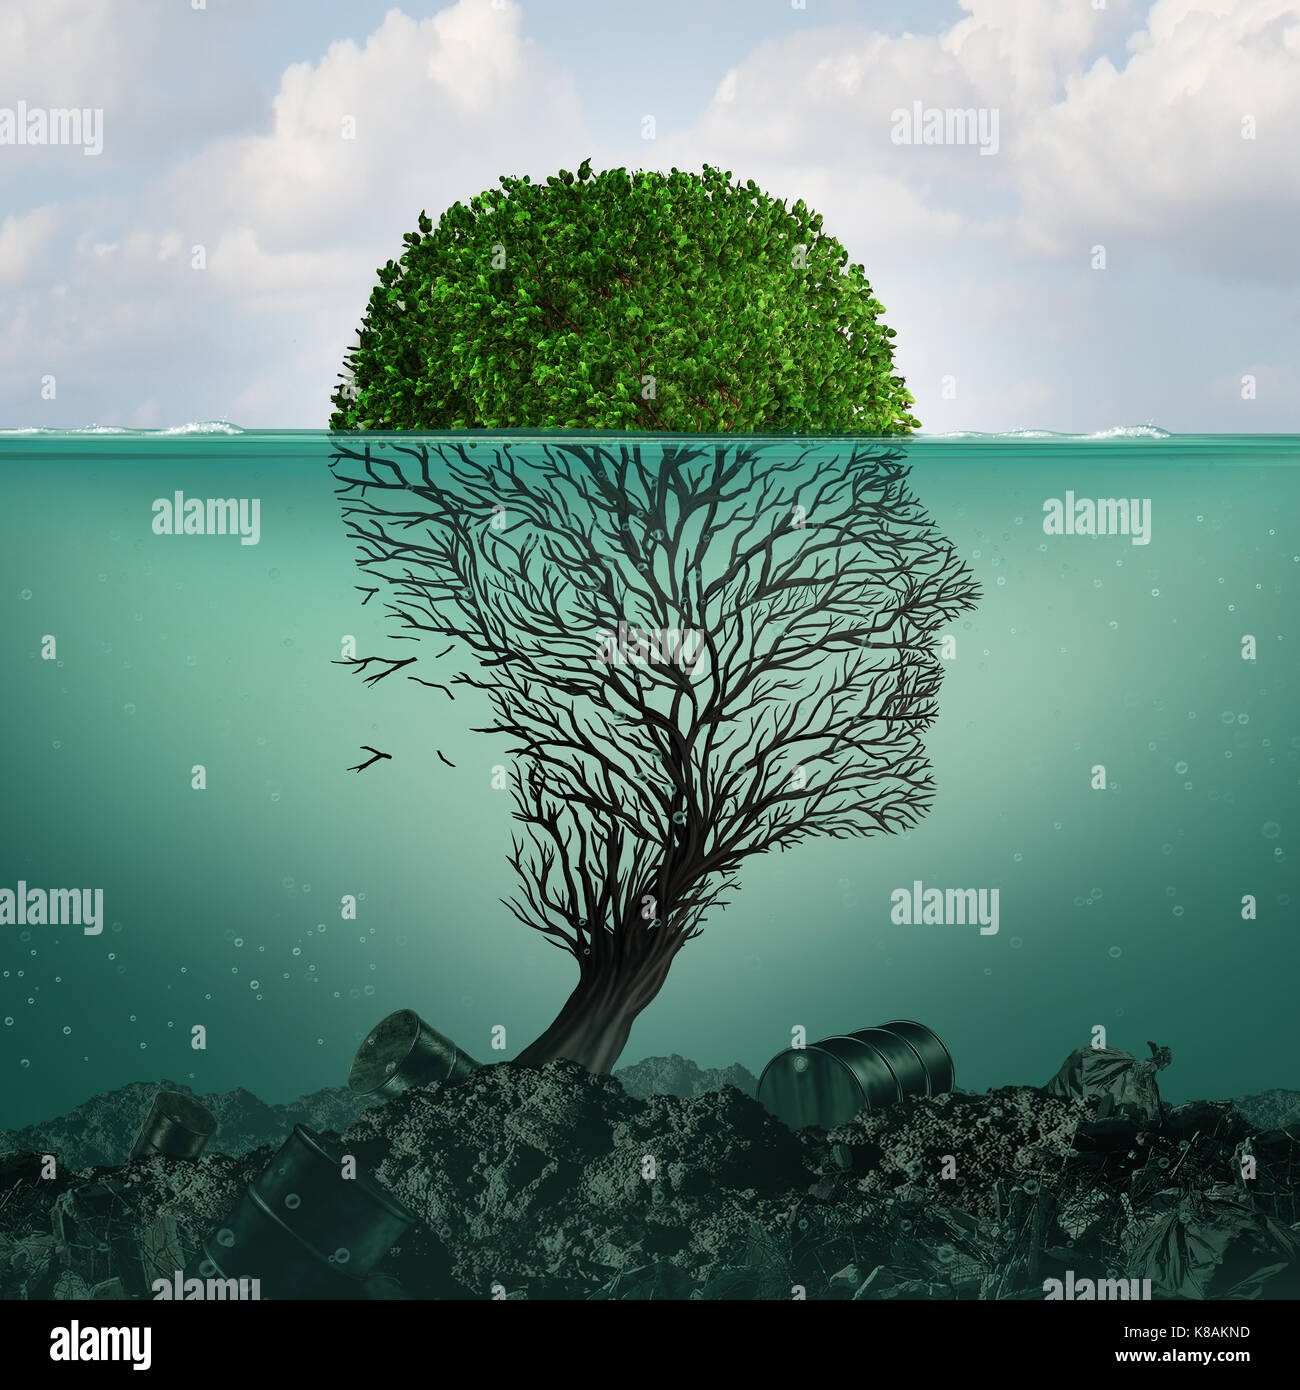 Polluted water contamination with hazardous industrial waste as a tree shaped as a human head underwater with the toxic liquid killing the plant. Stock Photo